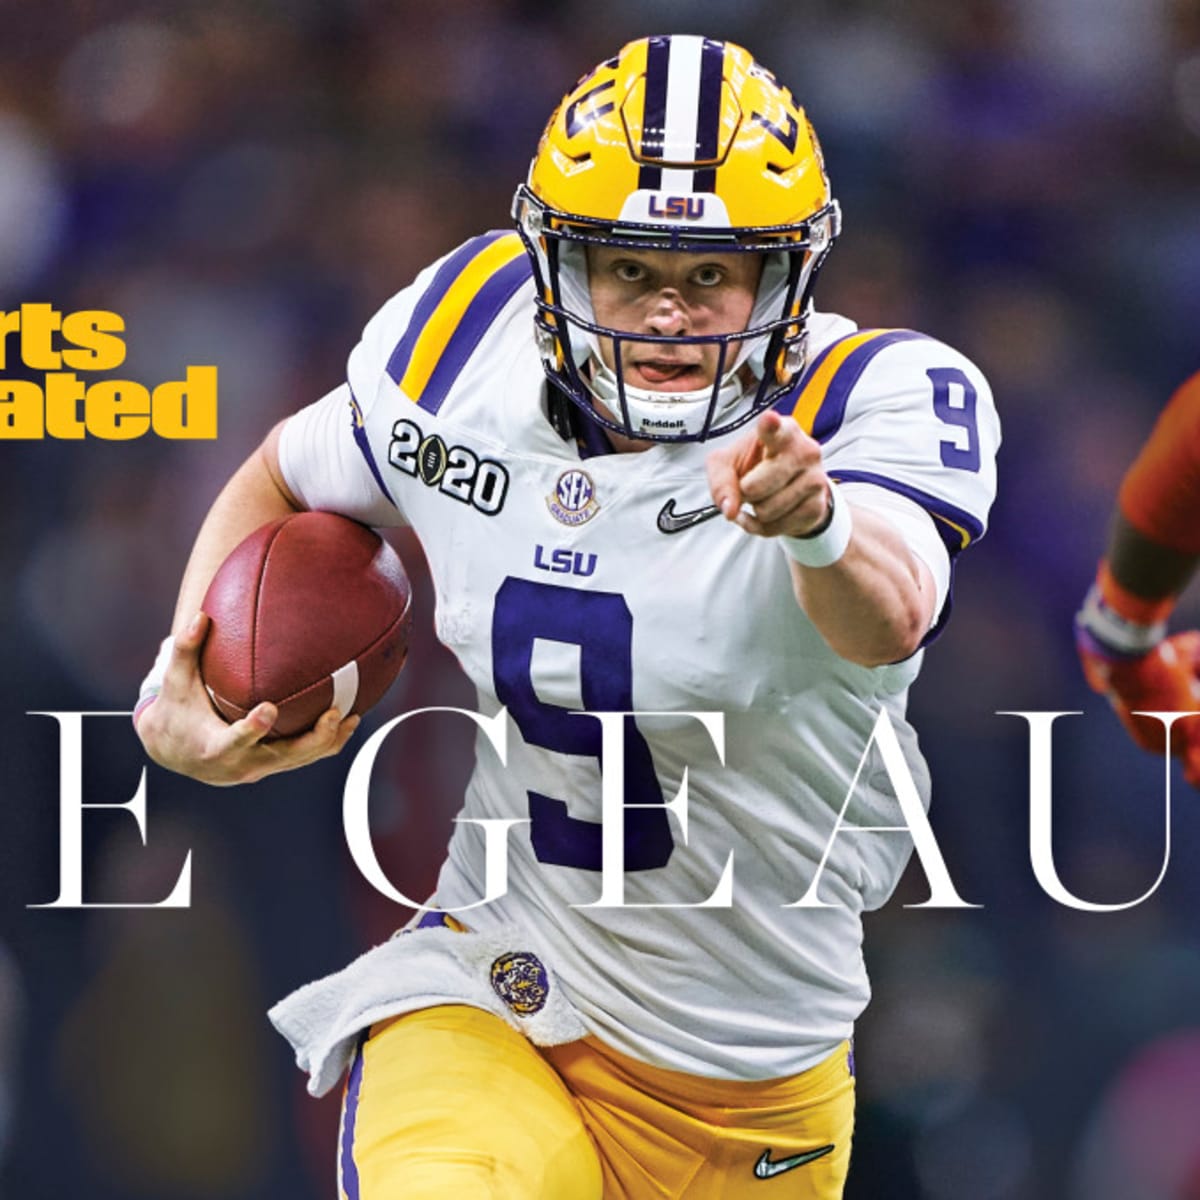 LSU wins historic national title, beating Clemson - Sports Illustrated